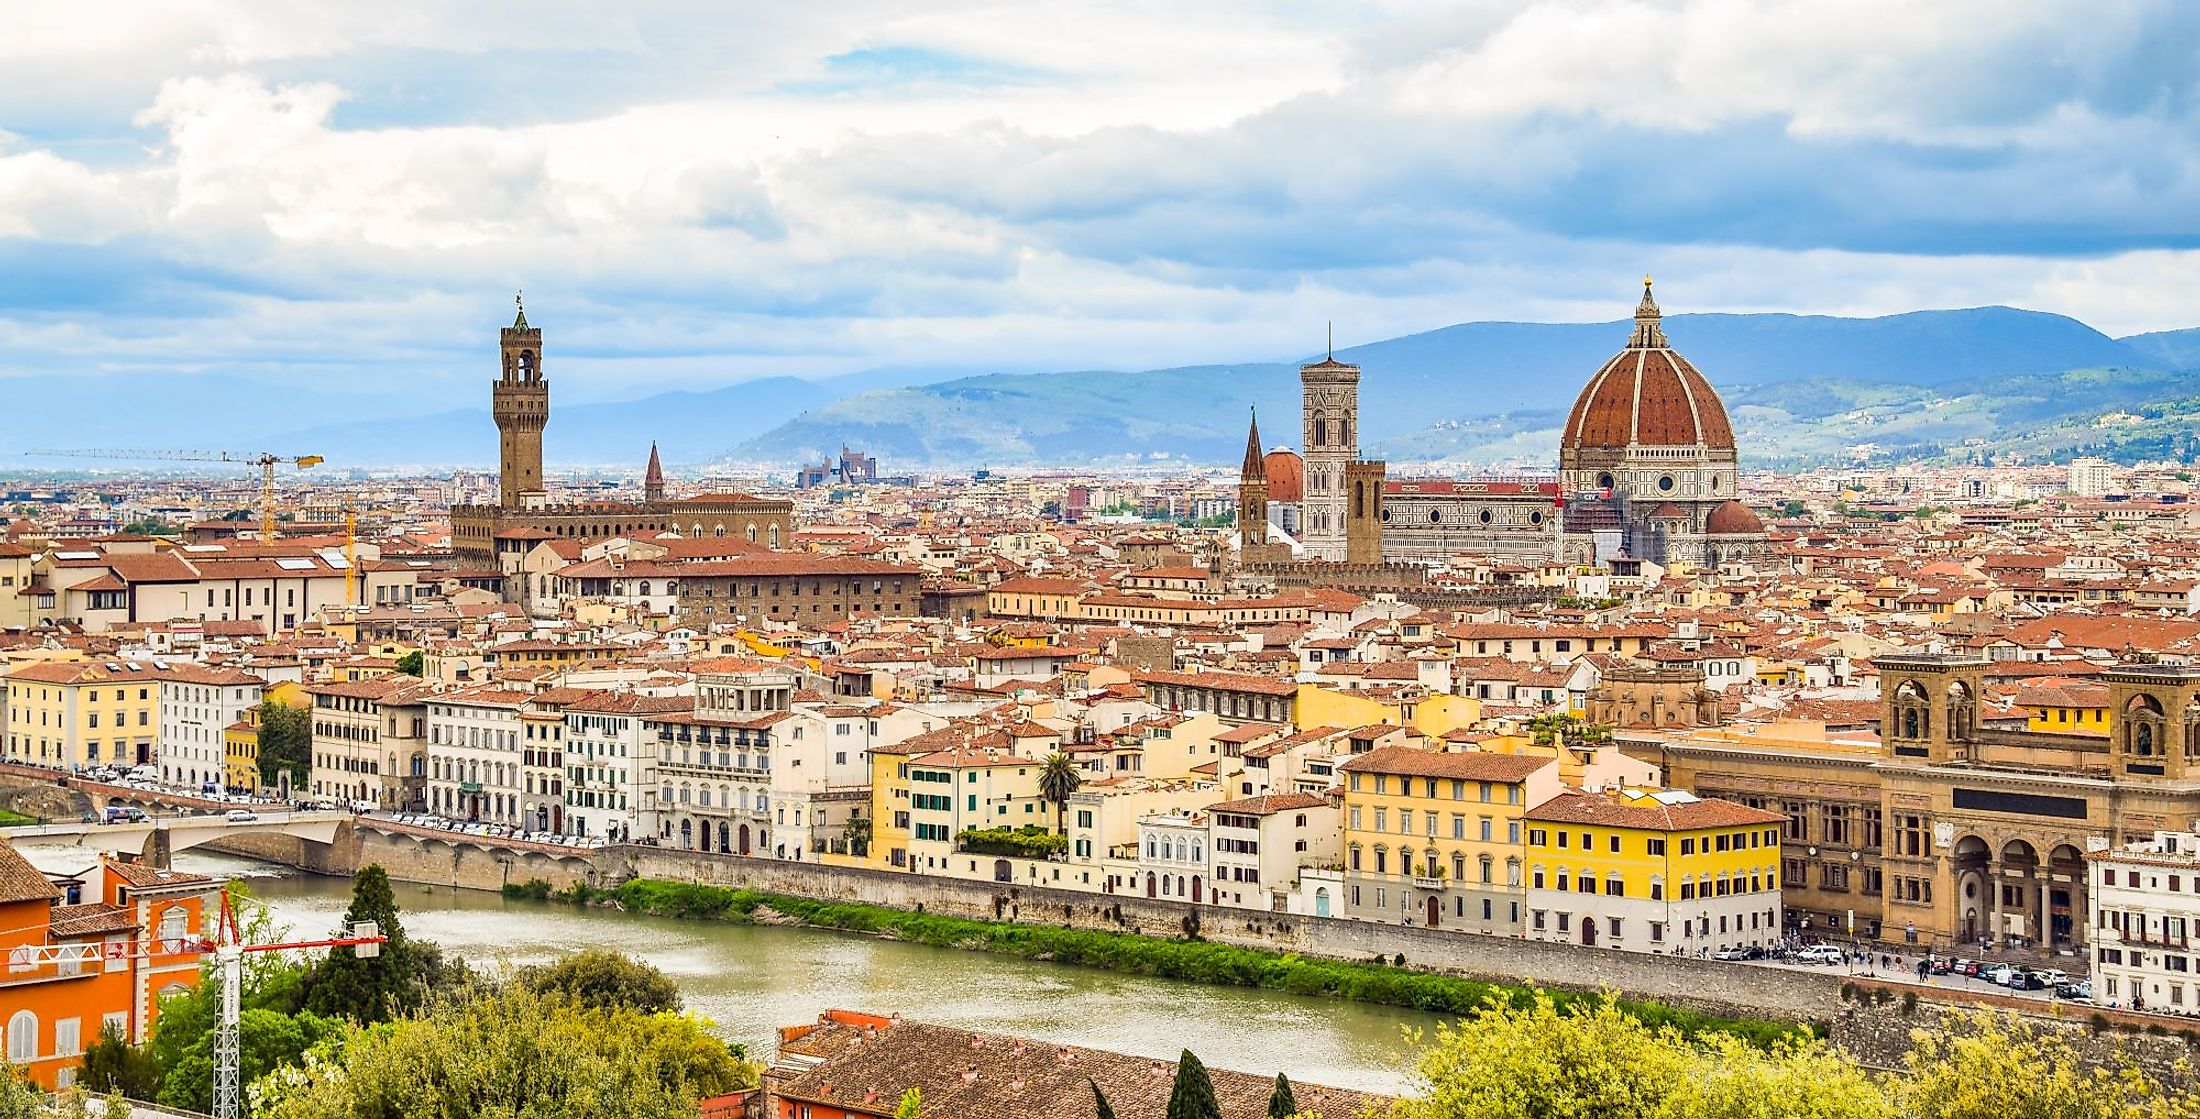 The city of Florence in Italy is considered the birthplace of European Renaissance. 